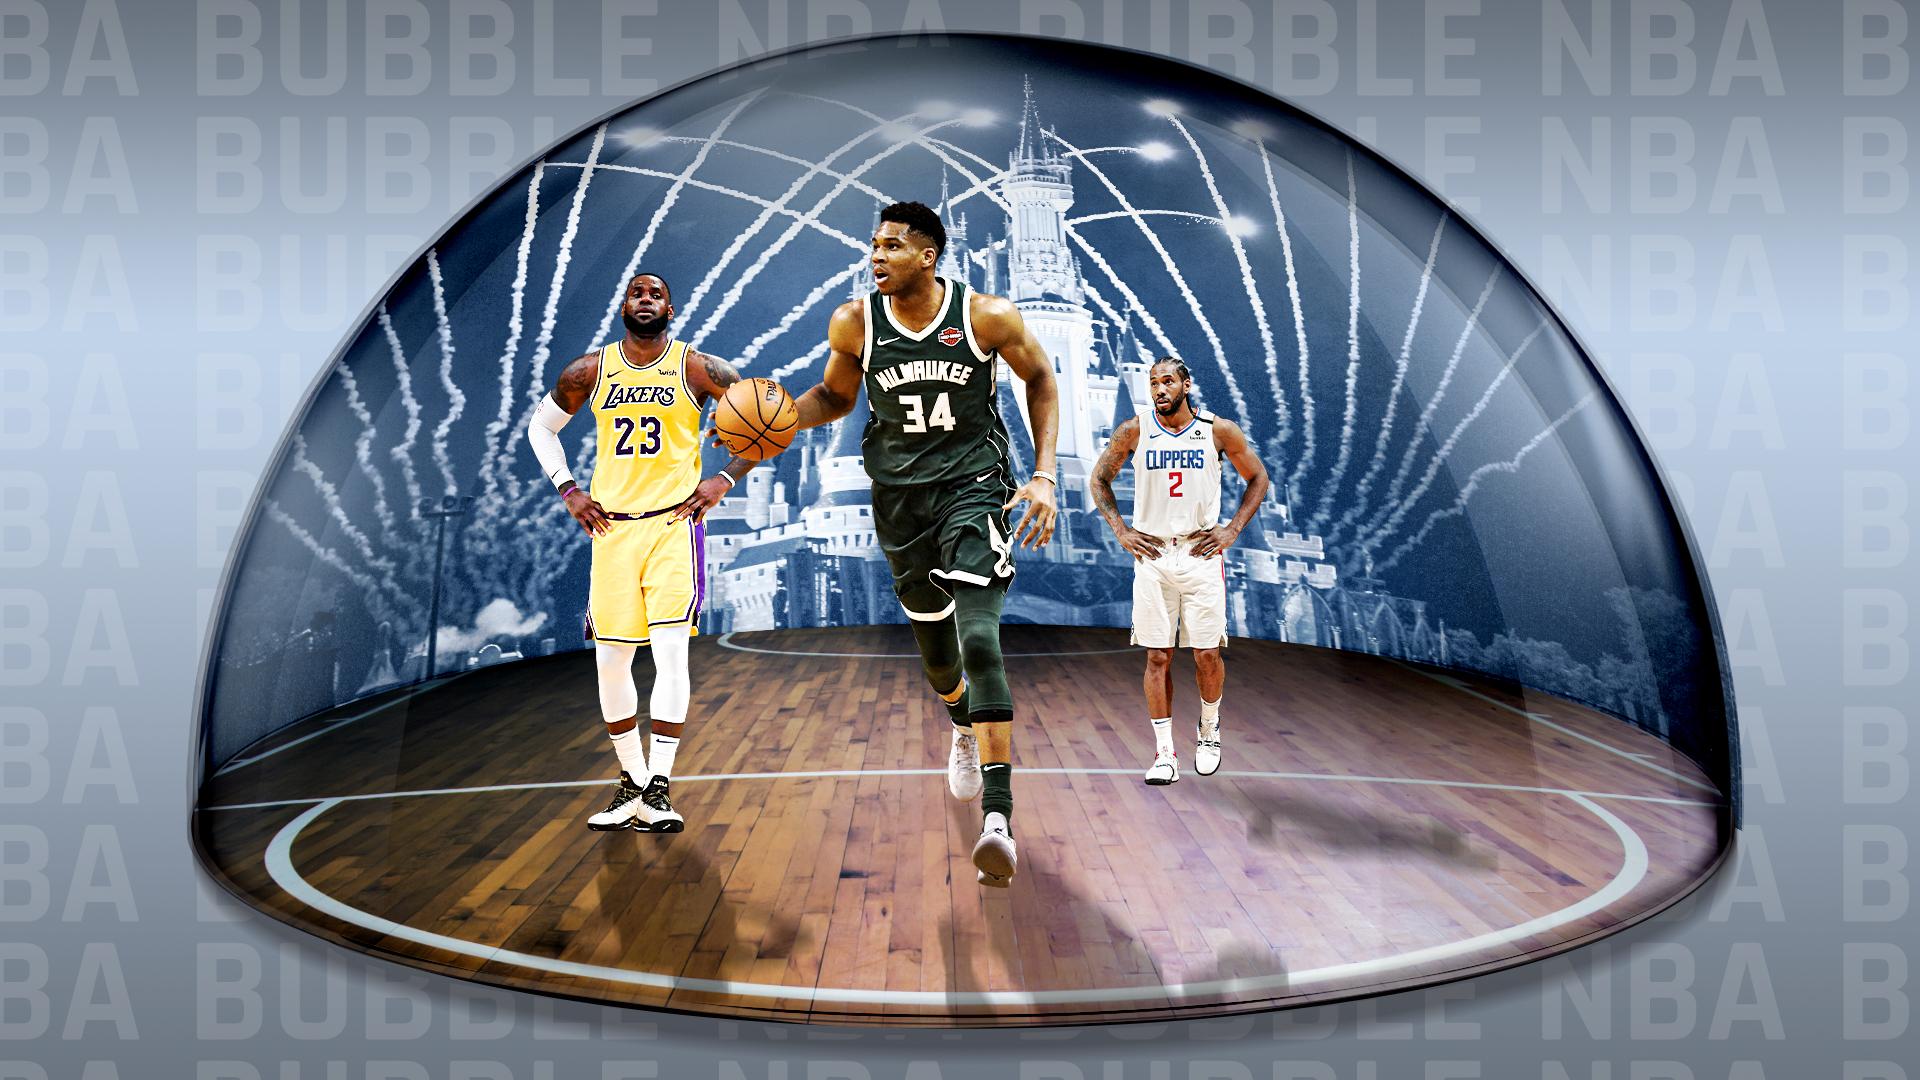 Check out the Details of All 30 NBA Teams in Action